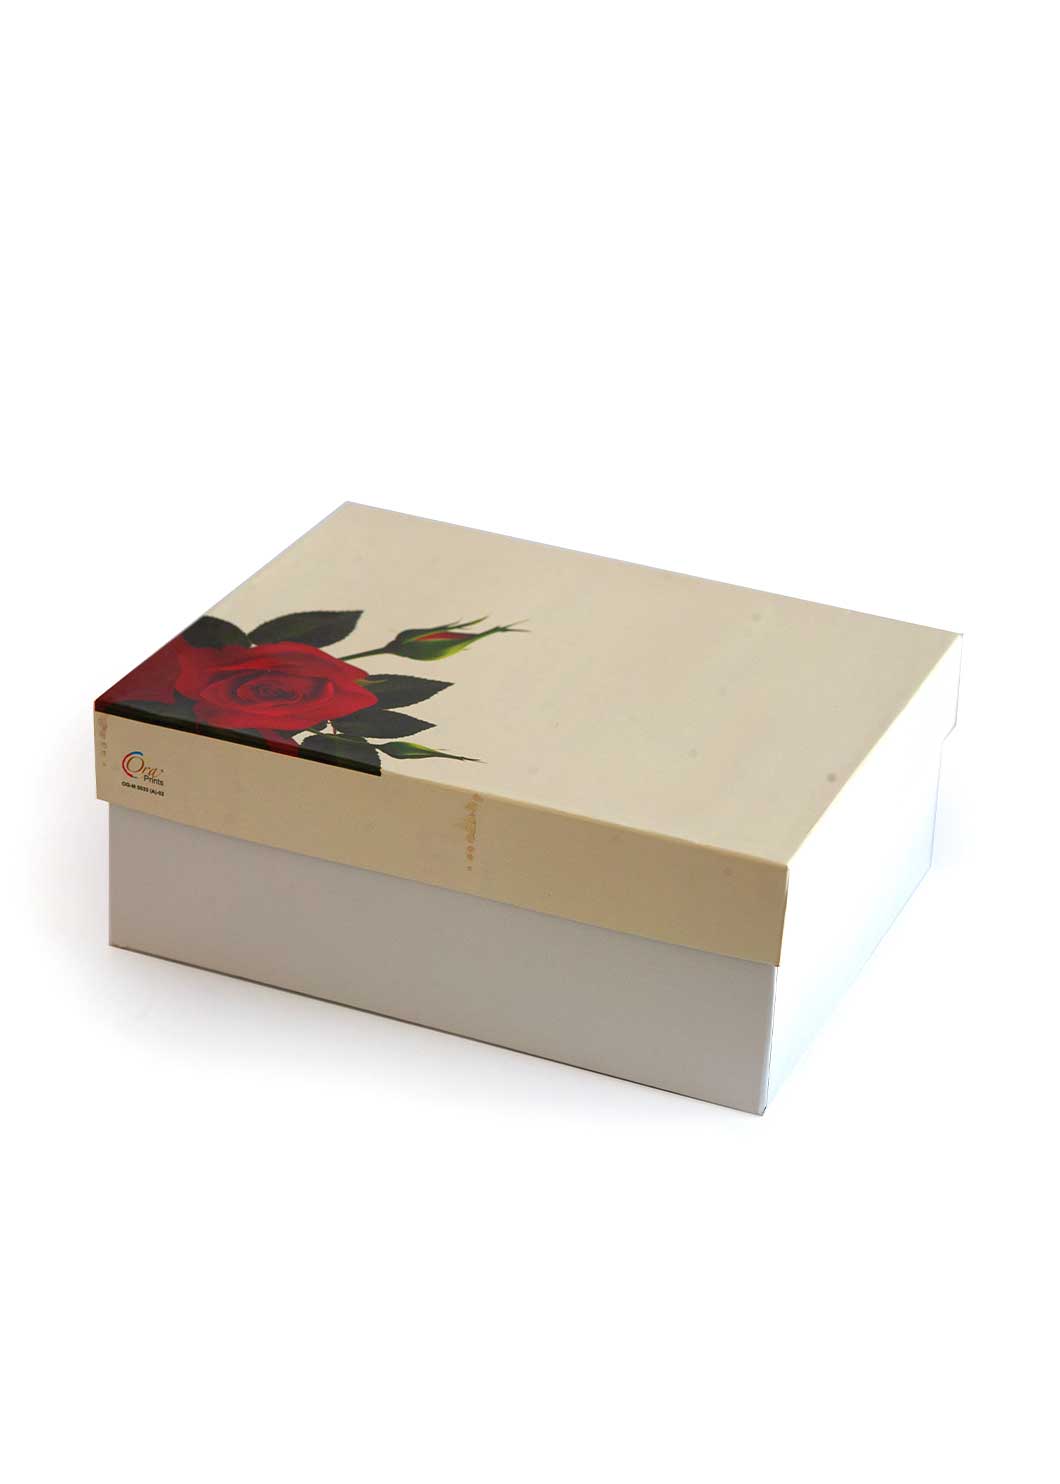 Red Roses on the Corner Design Box for packing